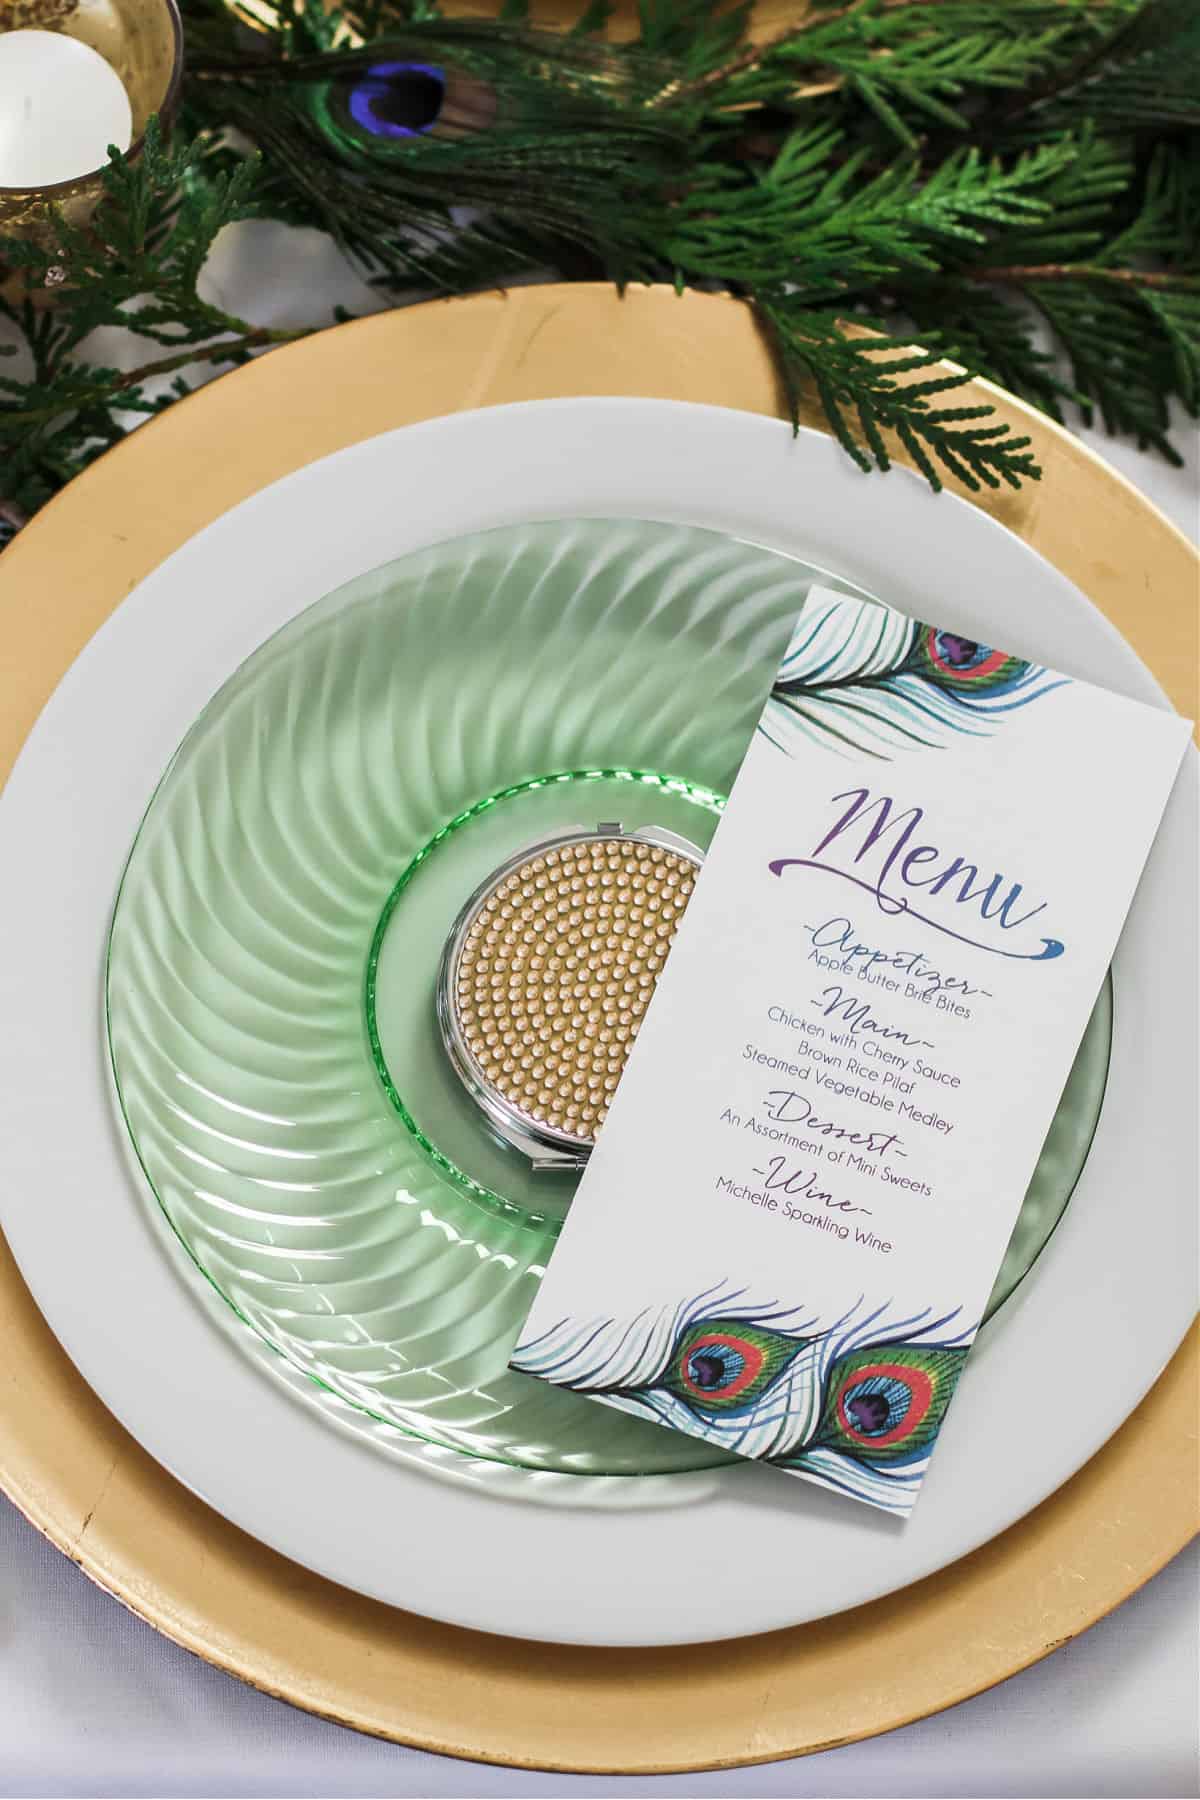 gold charger, white dinner plater, green dessert plate with printed menu on top